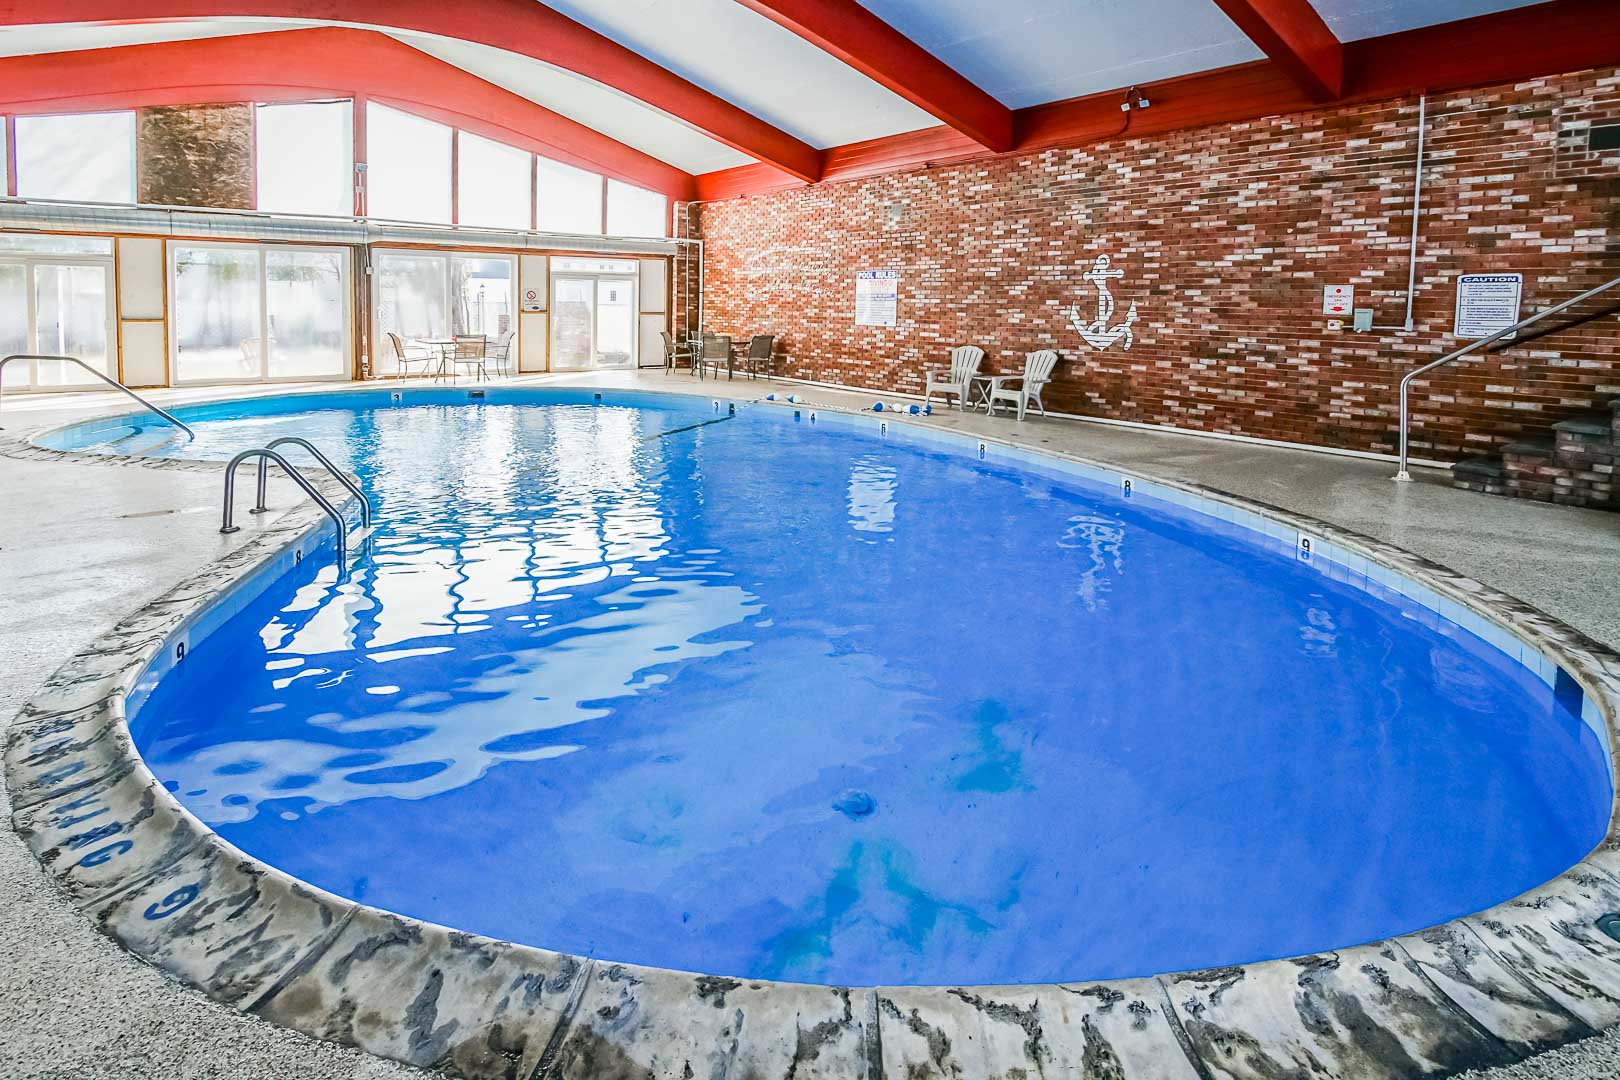 A crisp and clean indoor swimming pool at VRI's Courtyard Resort in Massachusetts.